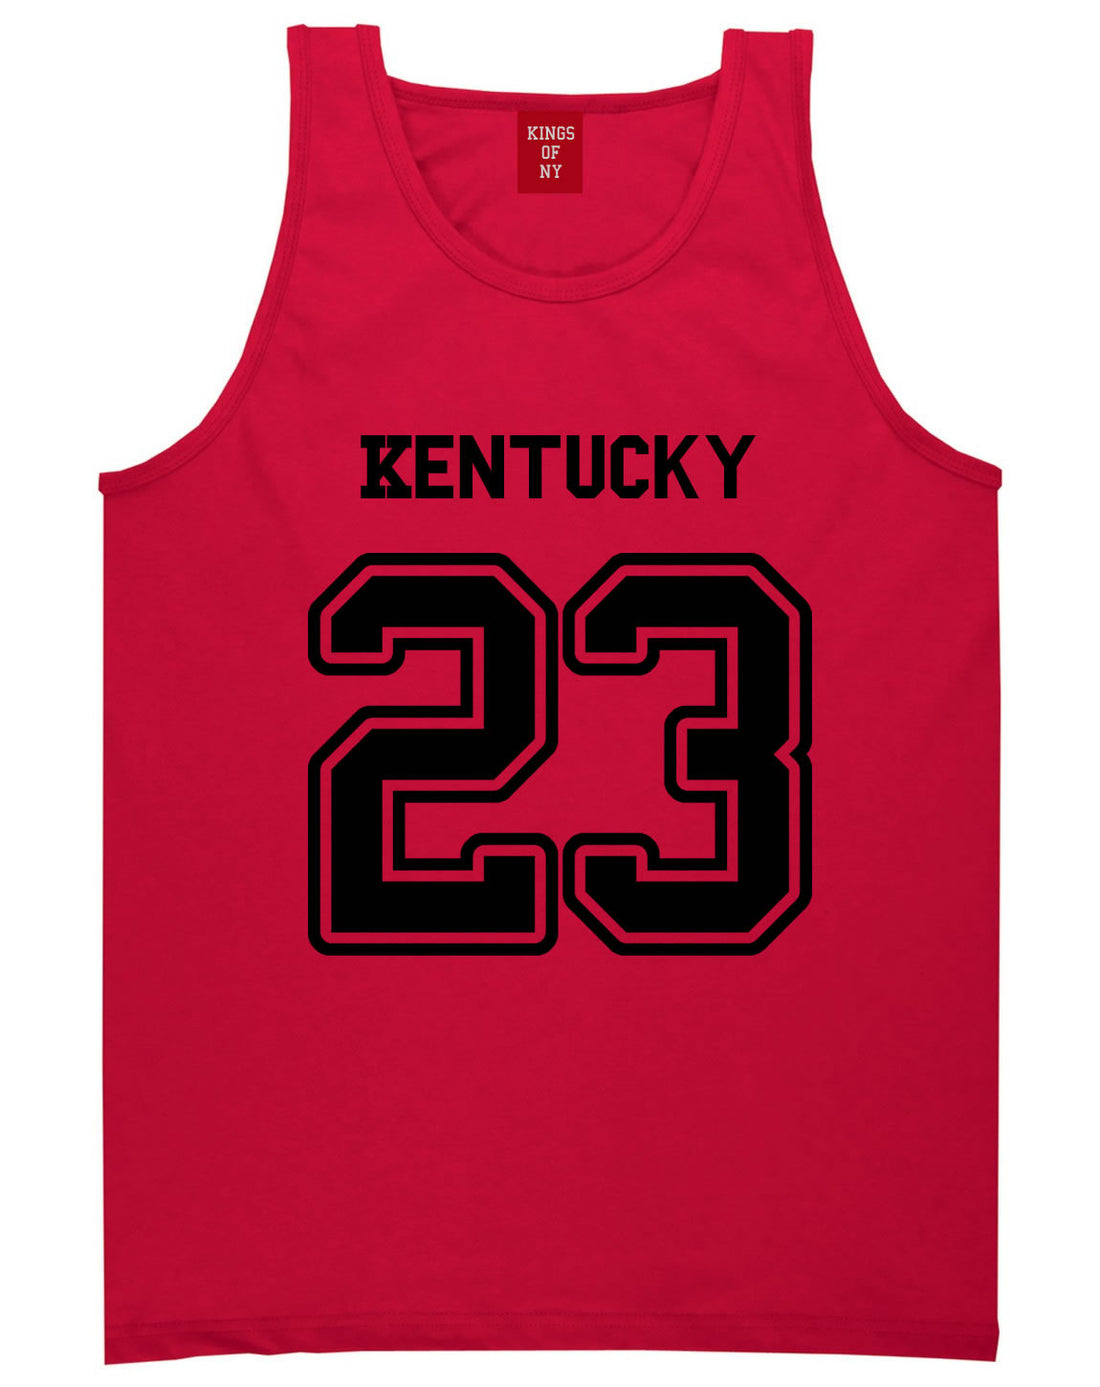 Sport Style Kentucky 23 Team State Jersey Mens Tank Top By Kings Of NY